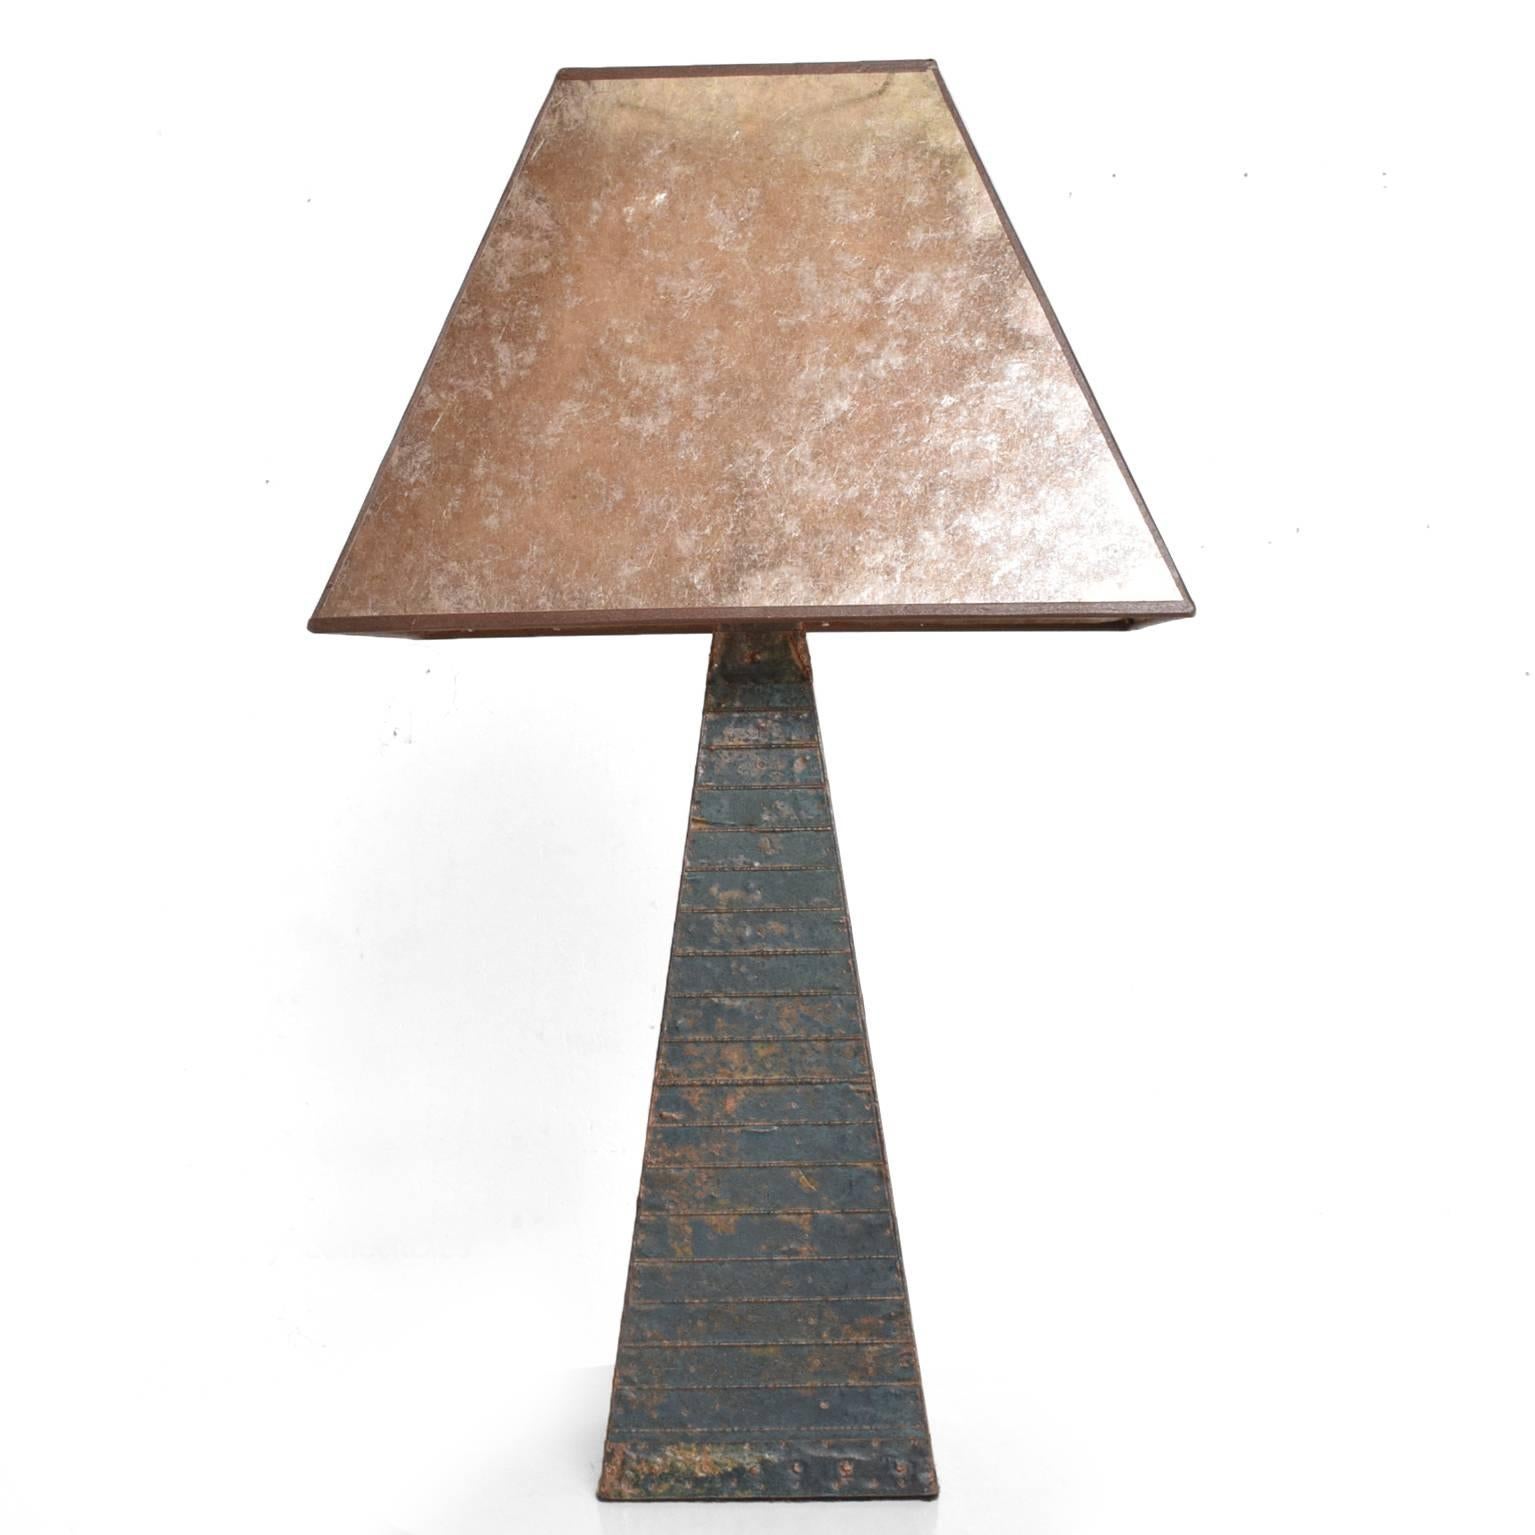 For your consideration a Brutalist table lamp with patinated copper.
Shade included.
USA, circa 1970s. Unmarked.
Dimensions: 31 1/2